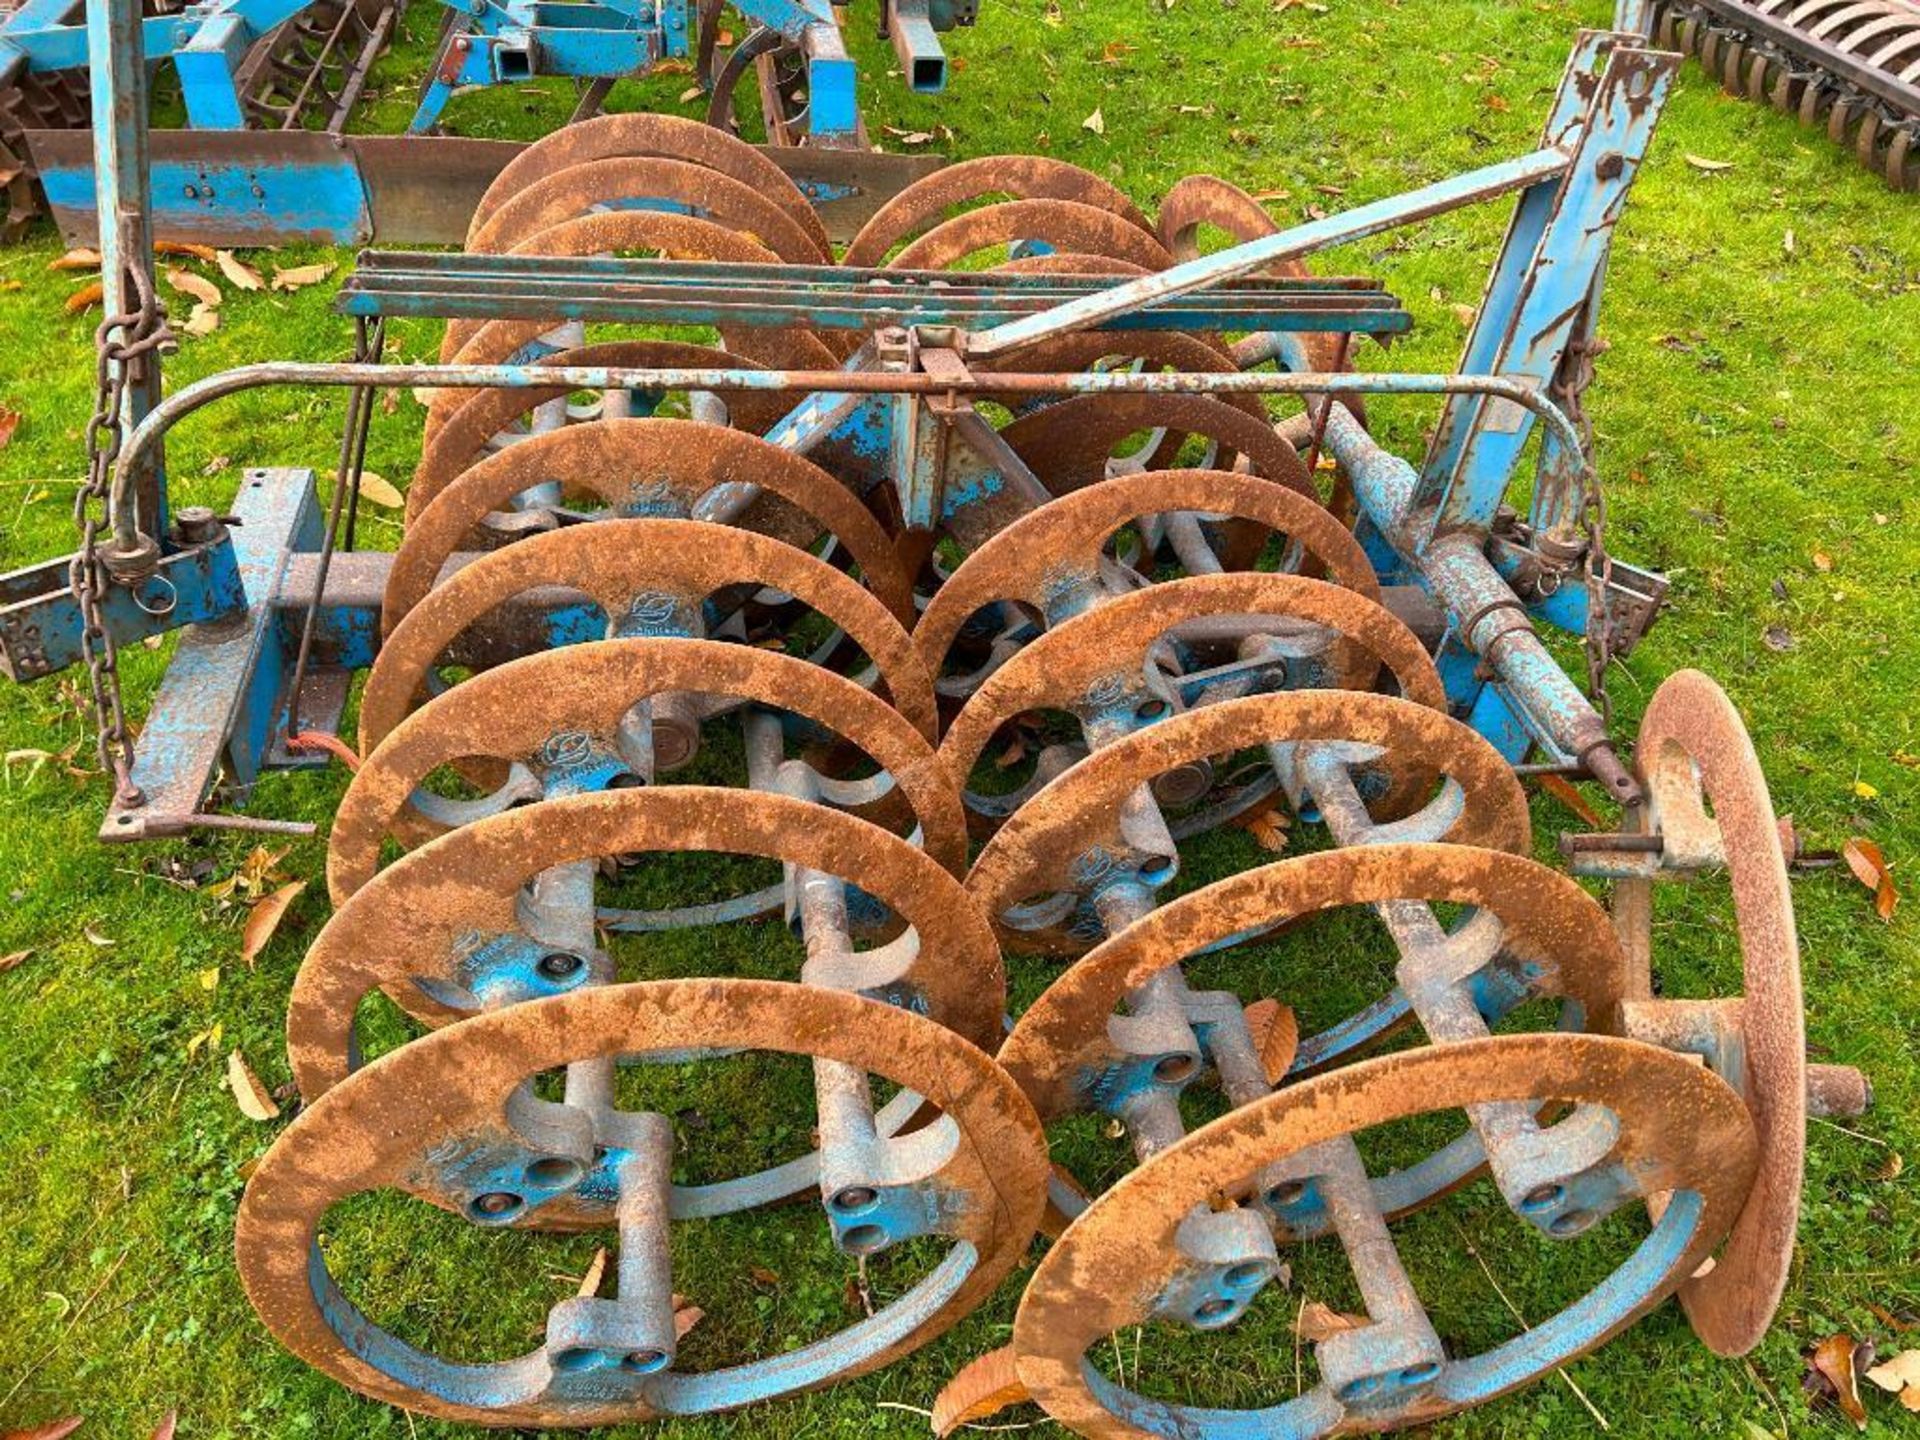 1985 Lemken 1.82m press on 3 point linkage frame, c/w 2 press rings. On farm from new. Serial No: 00 - Image 4 of 6